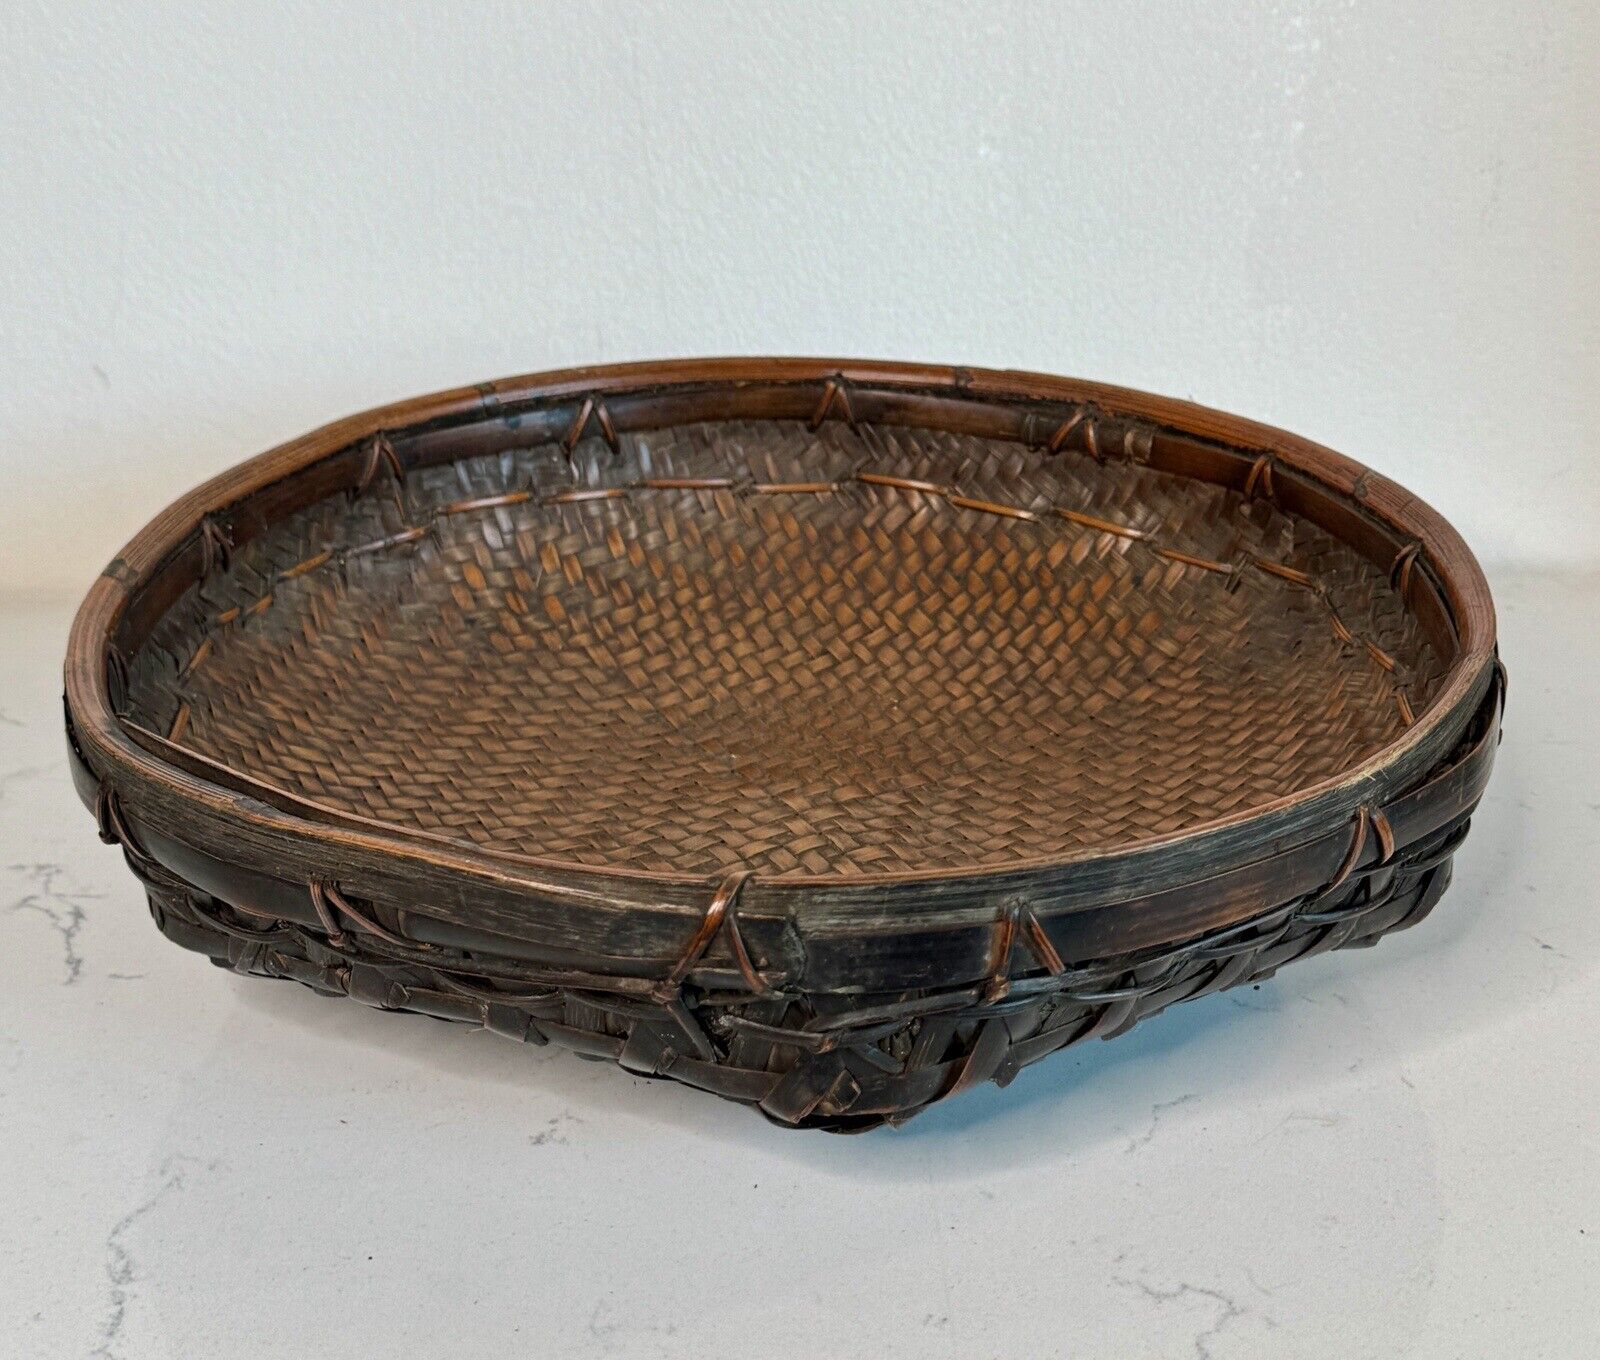 Early 20th Century South Asian Woven Rice Basket